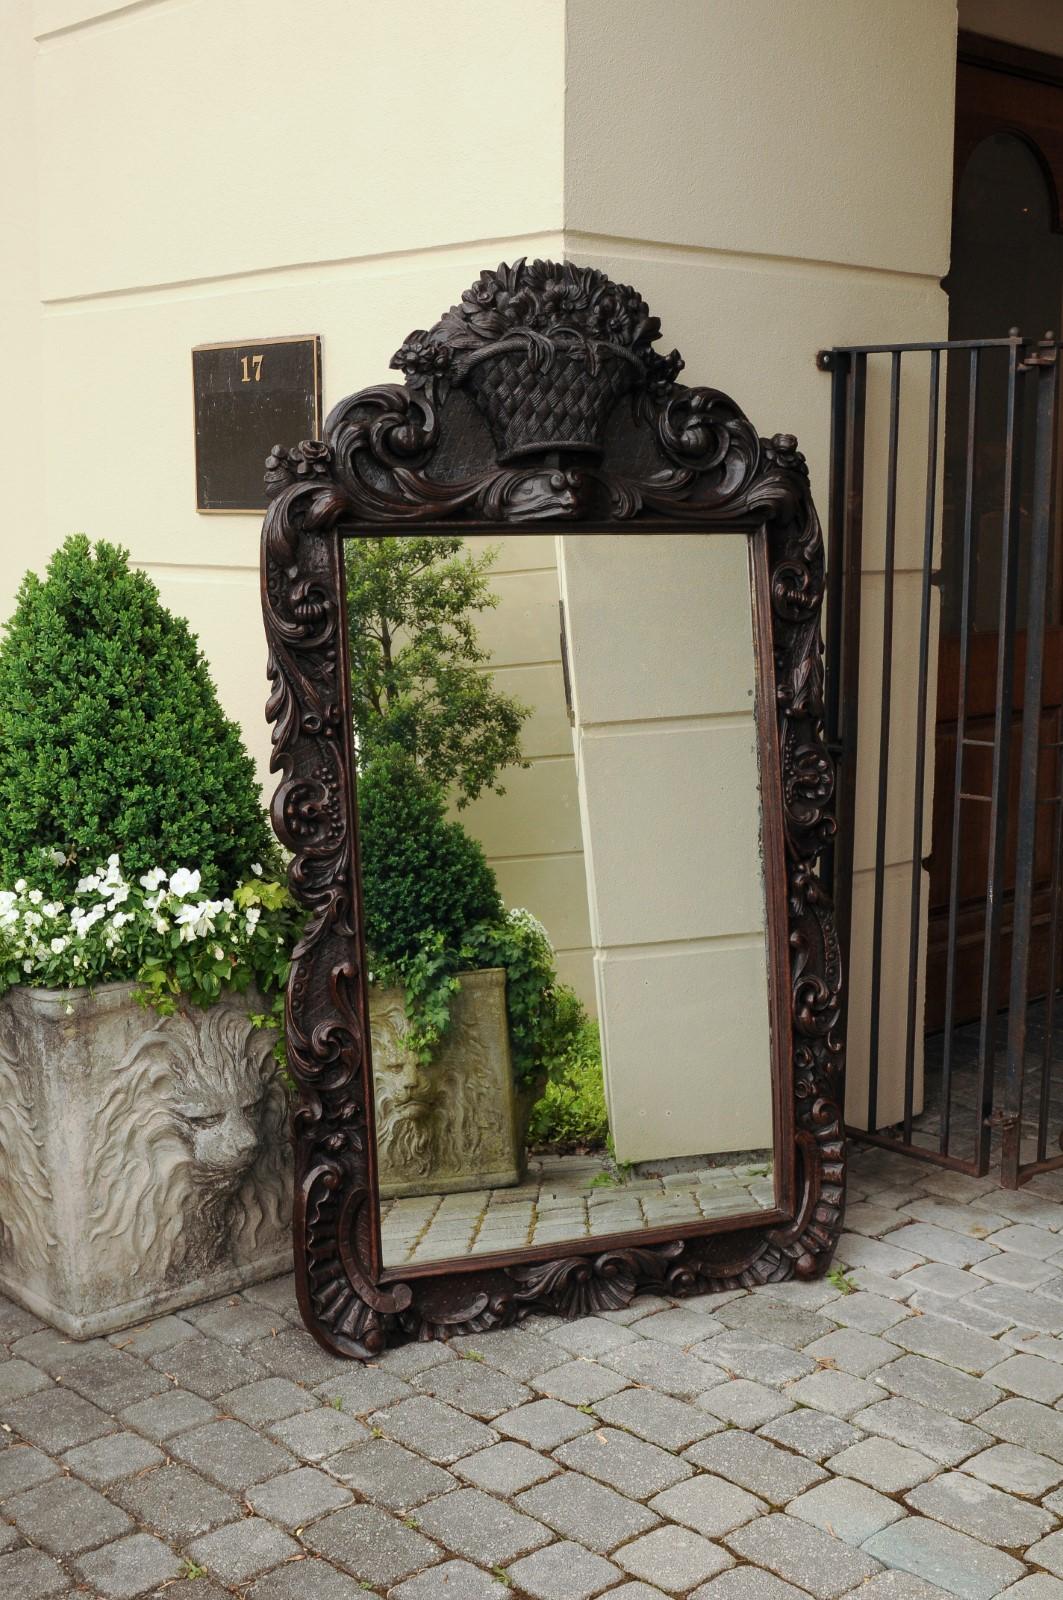 A hand carved wooden mirror from the early 20th century, with dark patina, floral decor and scrolls. Born in the early years of the 20th century, this exquisite Black Forest mirror features a sinuous Silhouette, accented with delicate scrolls